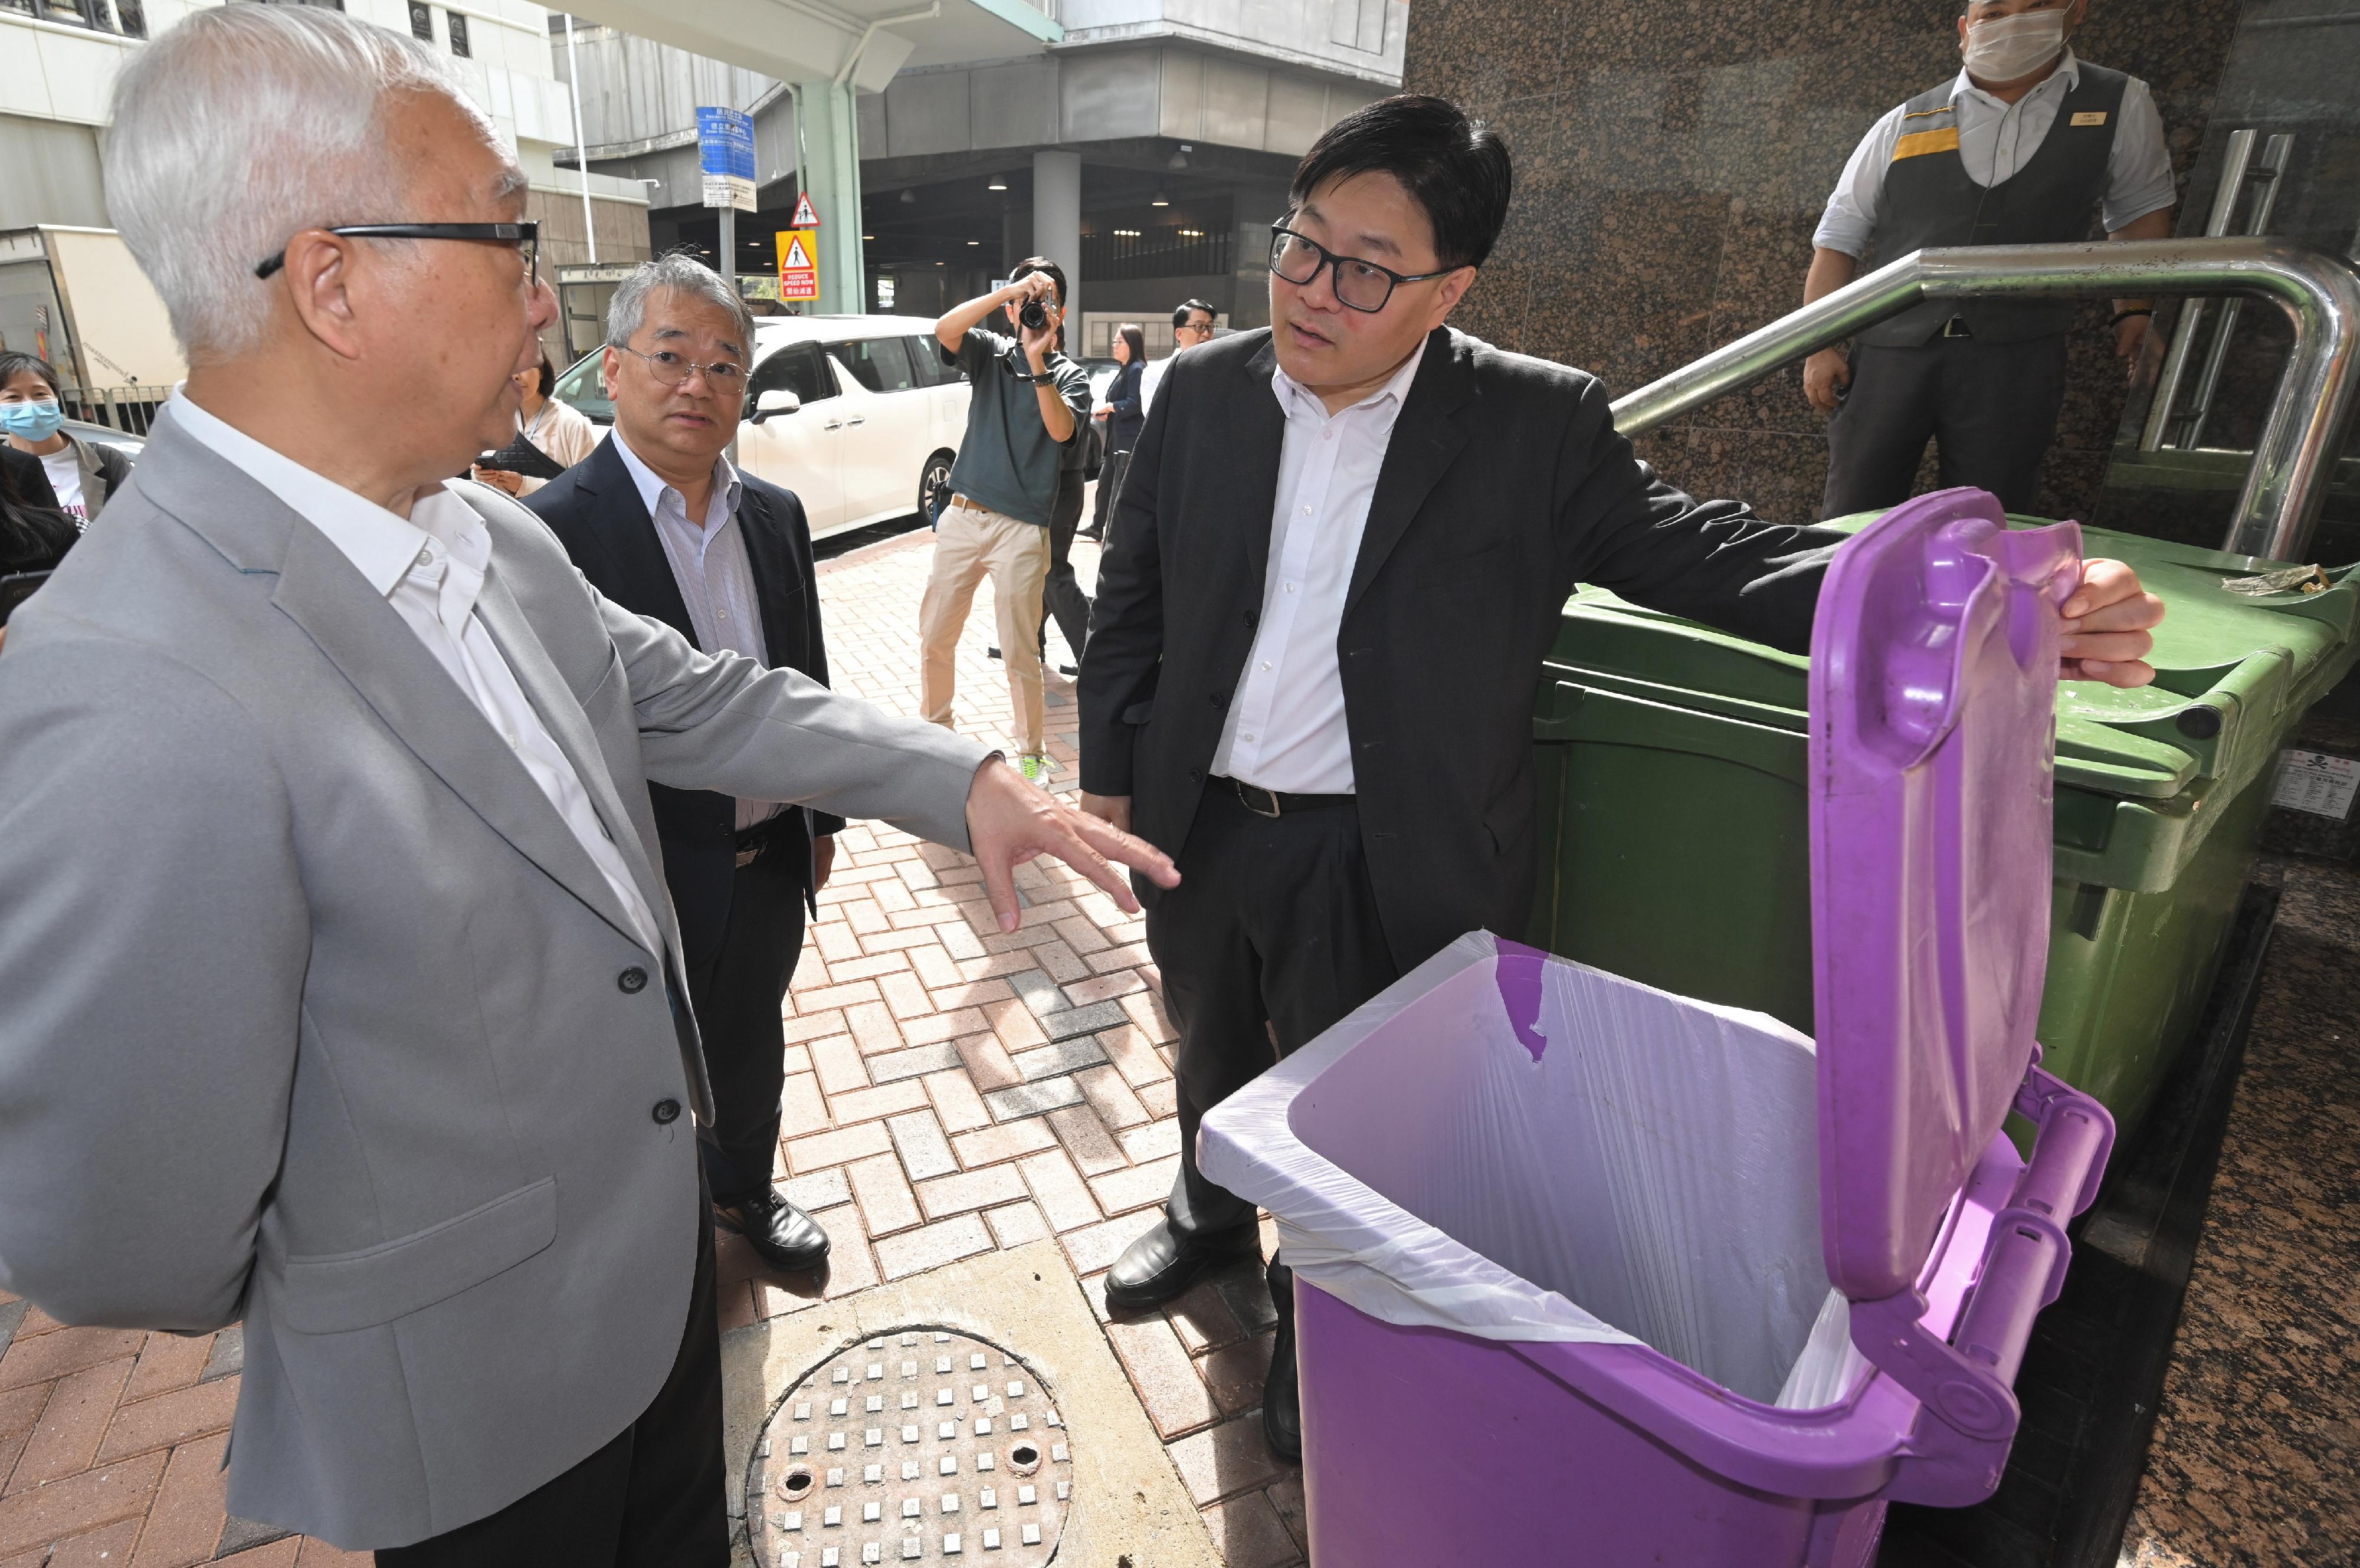 The Secretary for Environment and Ecology, Mr Tse Chin-wan, today (March 27) inspected various premises under the Municipal Solid Waste Charging Demonstration Scheme to understand the premises' preparatory work. Photo shows Mr Tse (left) and the Director of Environmental Protection, Dr Samuel Chui (centre), inspecting the process of a fast food restaurant chain's kitchen on handling waste and learning about the practical arrangements and requirements of the preparatory work for the Demonstration Scheme.